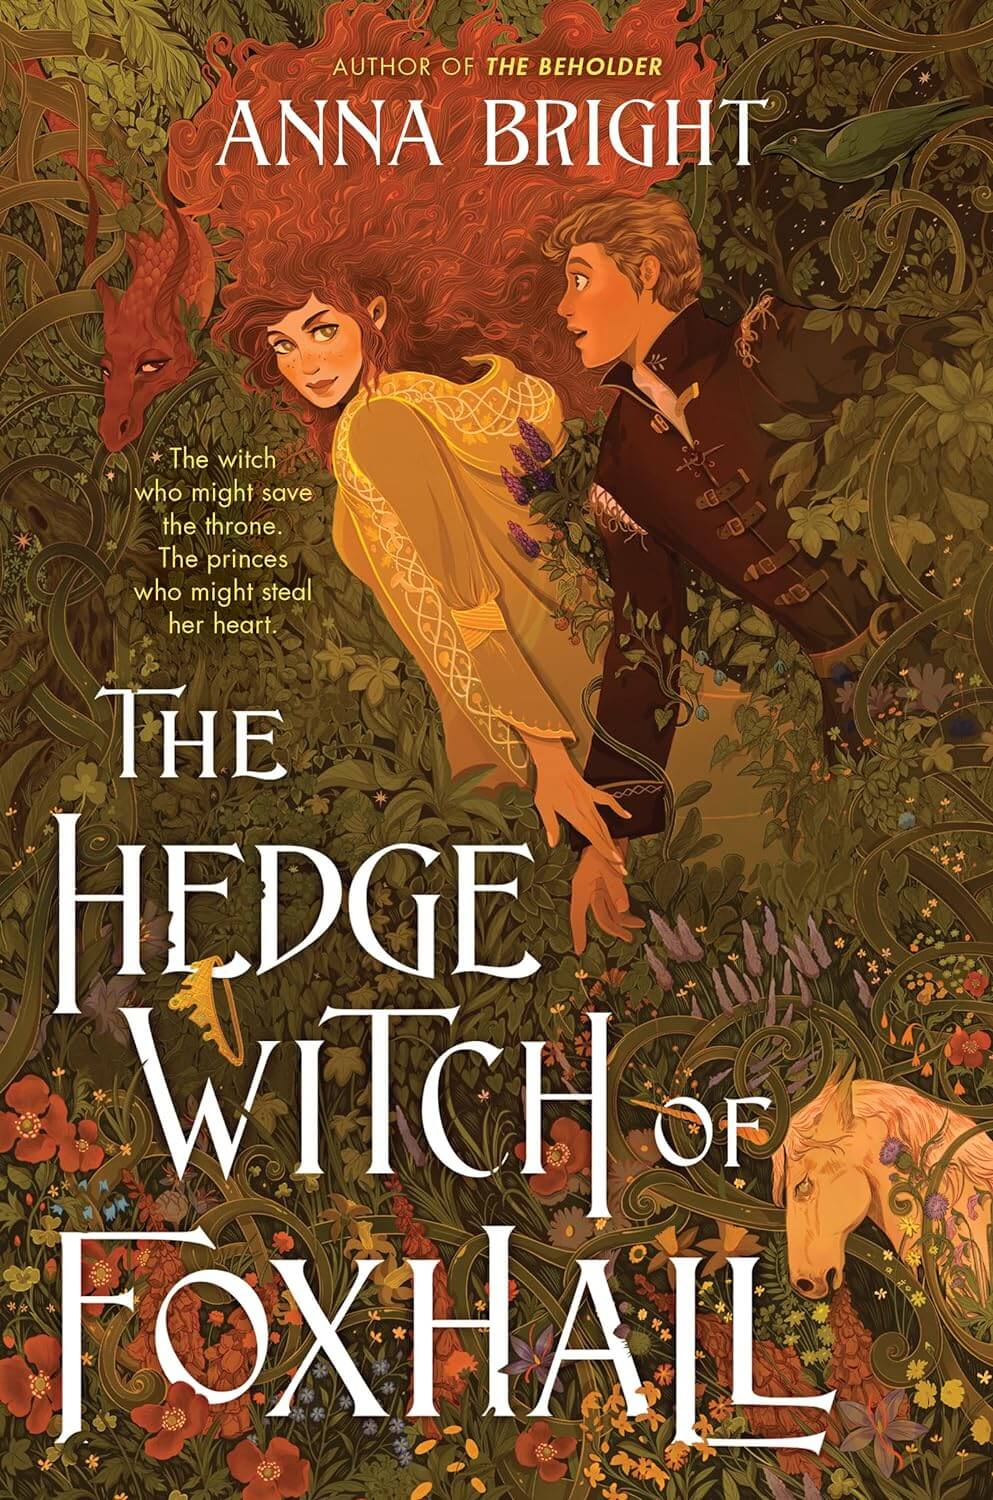 The Hedge Witch of Fox Hall